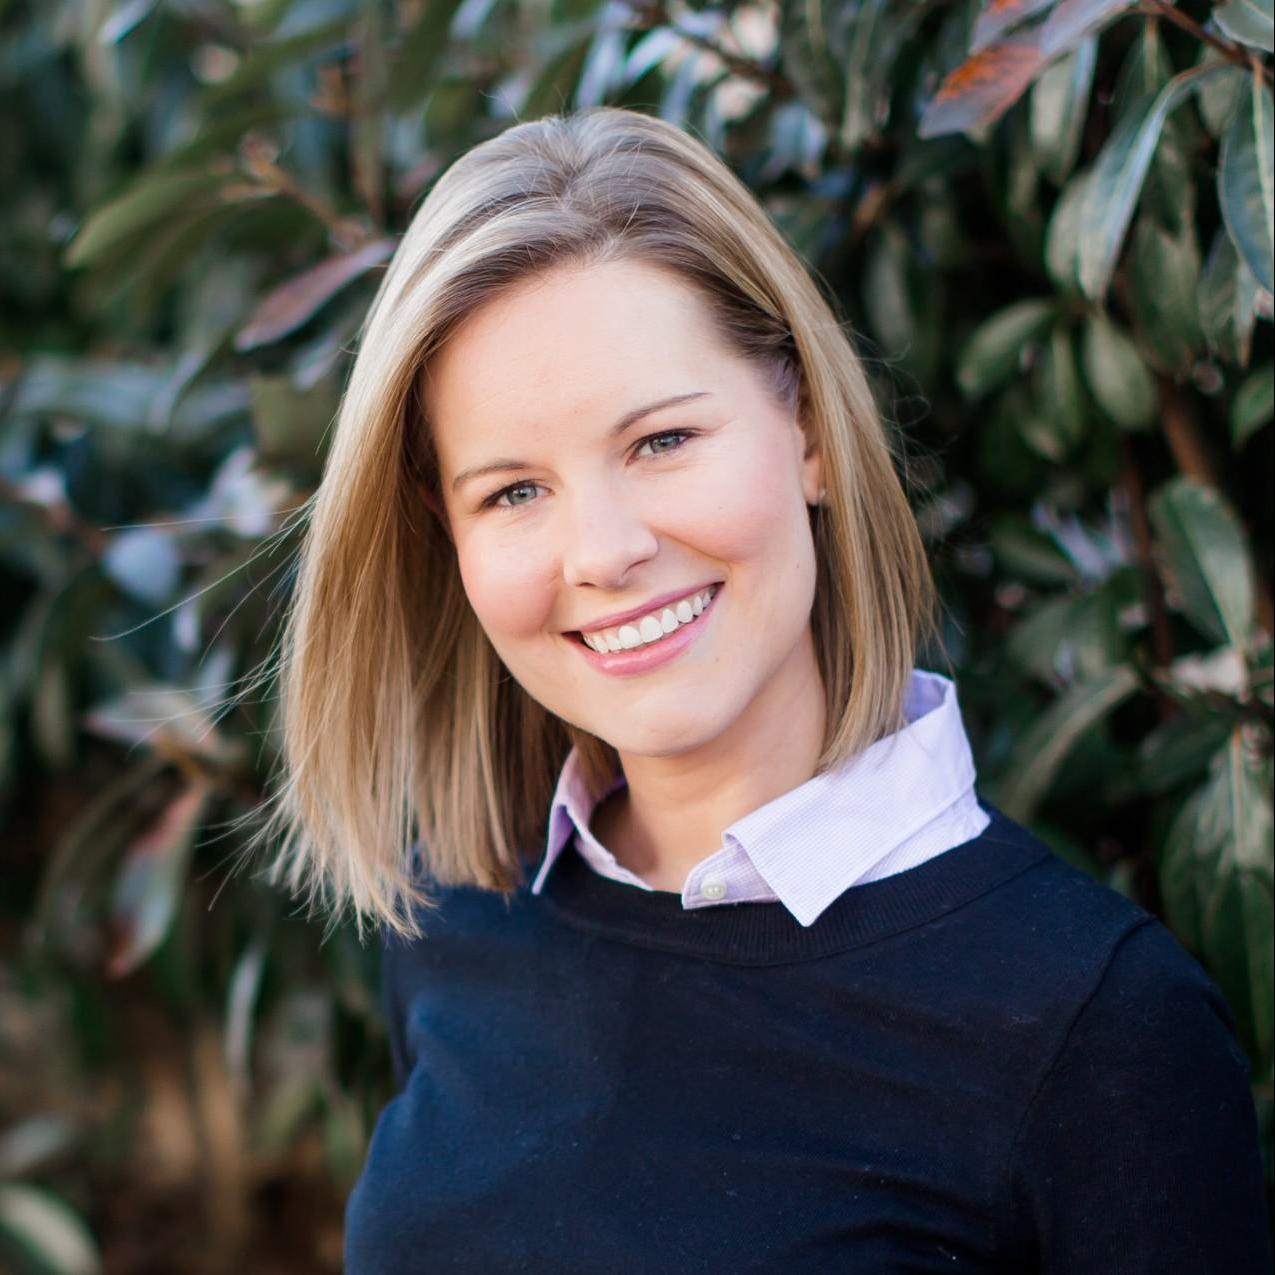 Marie has medium length blonde hair. She is tilting her head to view the camera and smiling. She has blue eyes and is wearing a white collard shirt. Over the white collard shirt she is wearing a dark navy blue sweater. The background is of greenery. 